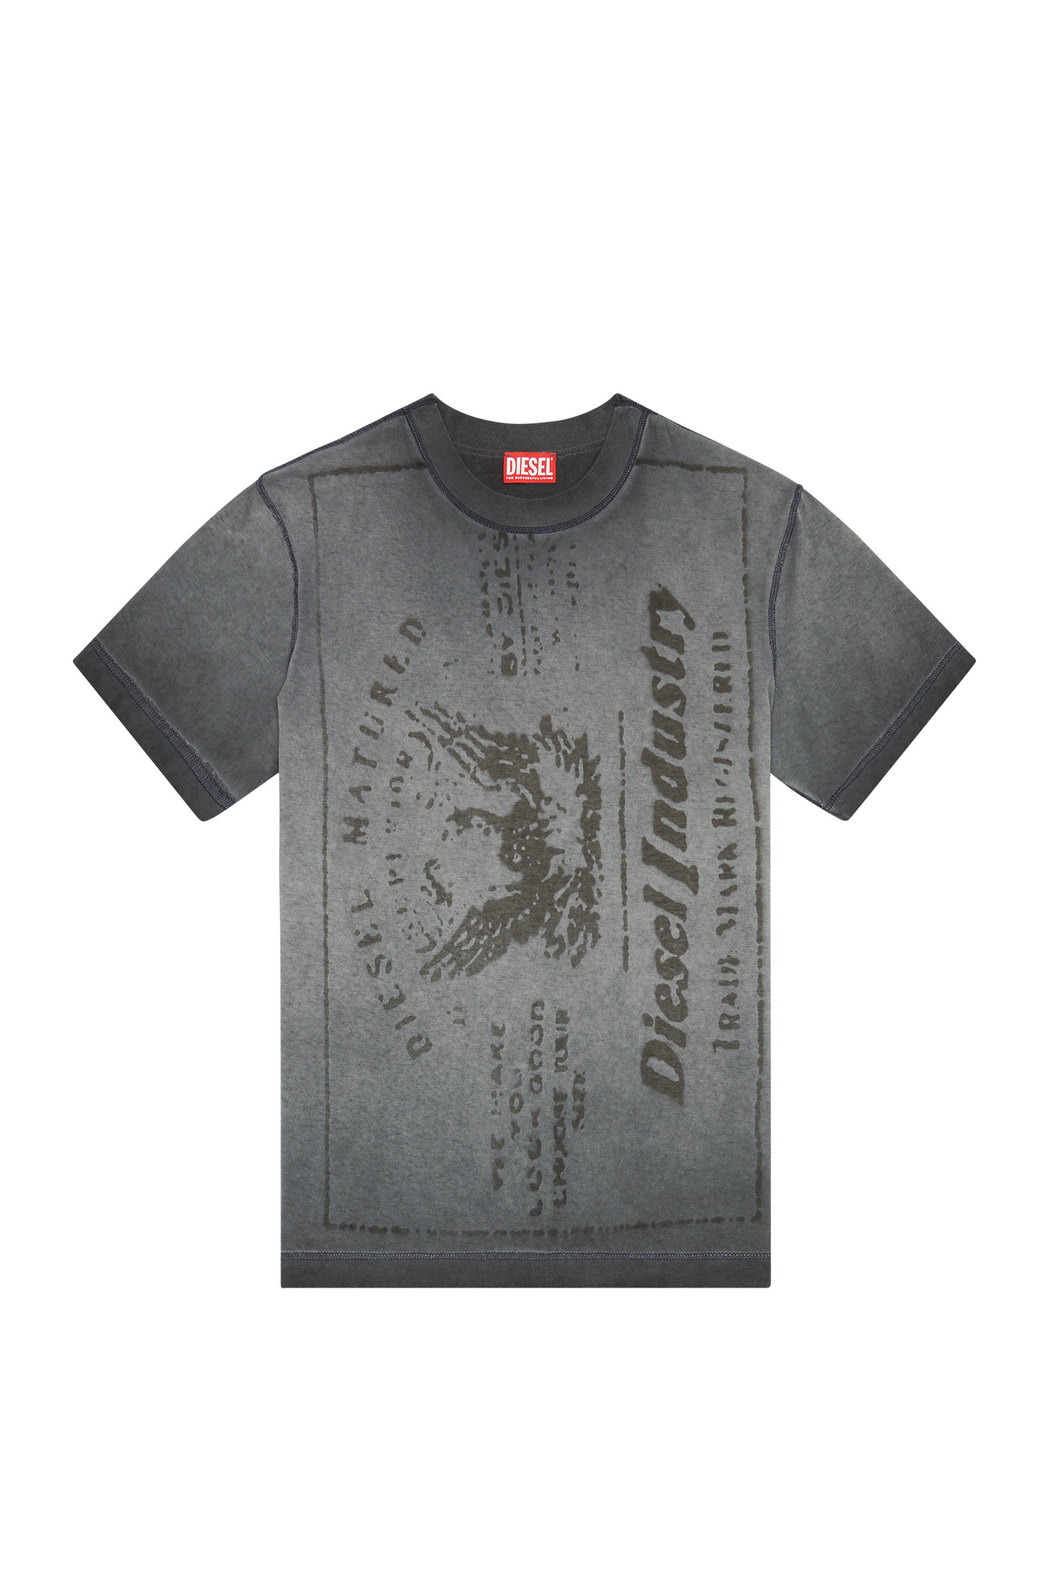 T-shirt with Diesel Matured print